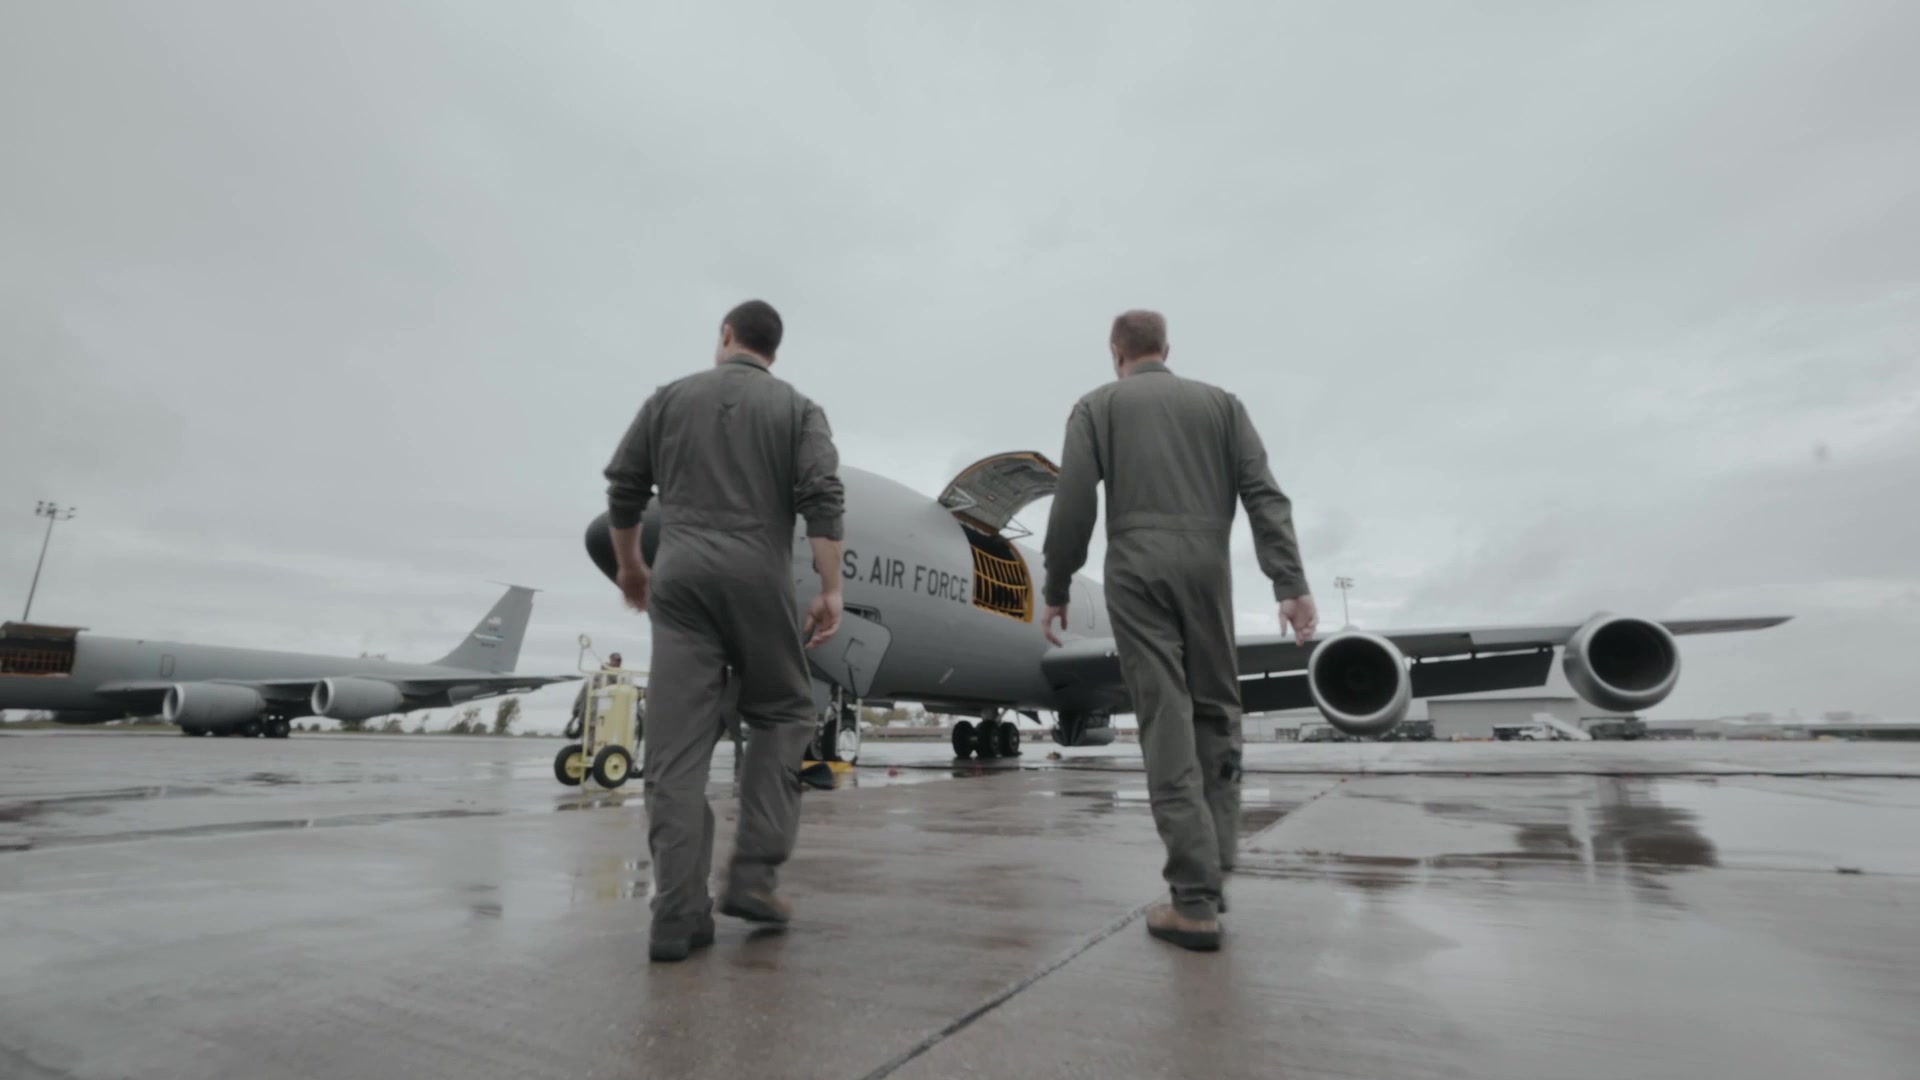 Maj. Dennis "JP8" Jakubczyk from the 914th Air Refueling Wing at Niagara Falls Air Reserve Station, N.Y. leads his team west to connect with a pair of B-52s from Minot Air Force Base. JP8 has been wearing our uniform for over 16 years. Here's his story of why he loves being a Reserve Citizen Airmen. The demographic for this video is intended for young airmen or new recruits age 18 to 25 that are interested in becoming pilots in the Air Force Reserve.